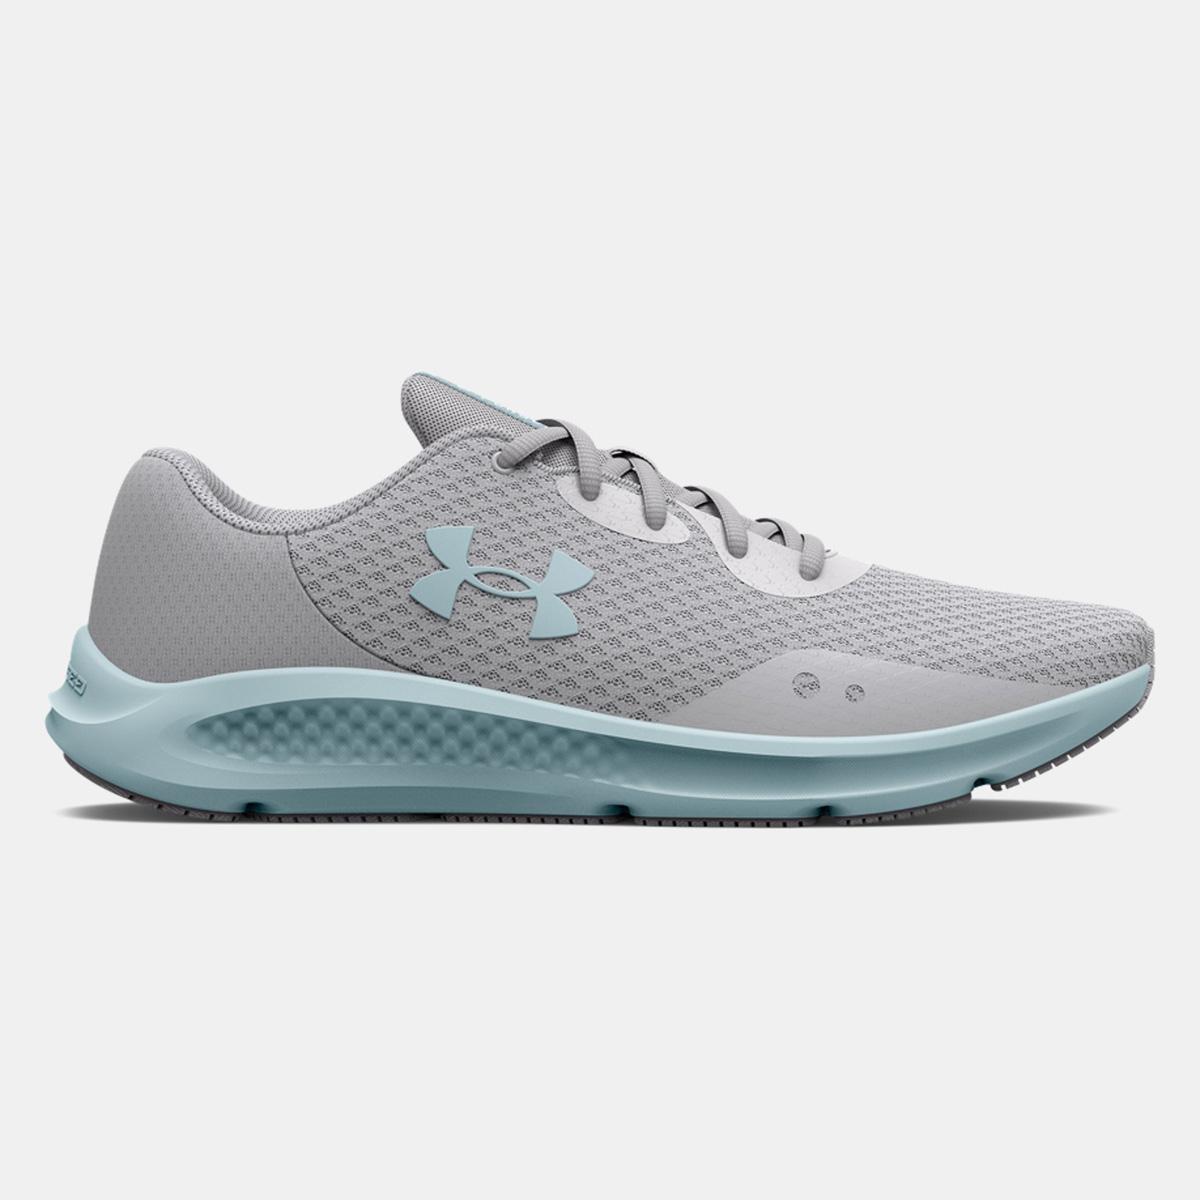 Under Armour Charged Pursuit 3 Running Shoes for $26.23 Shipped